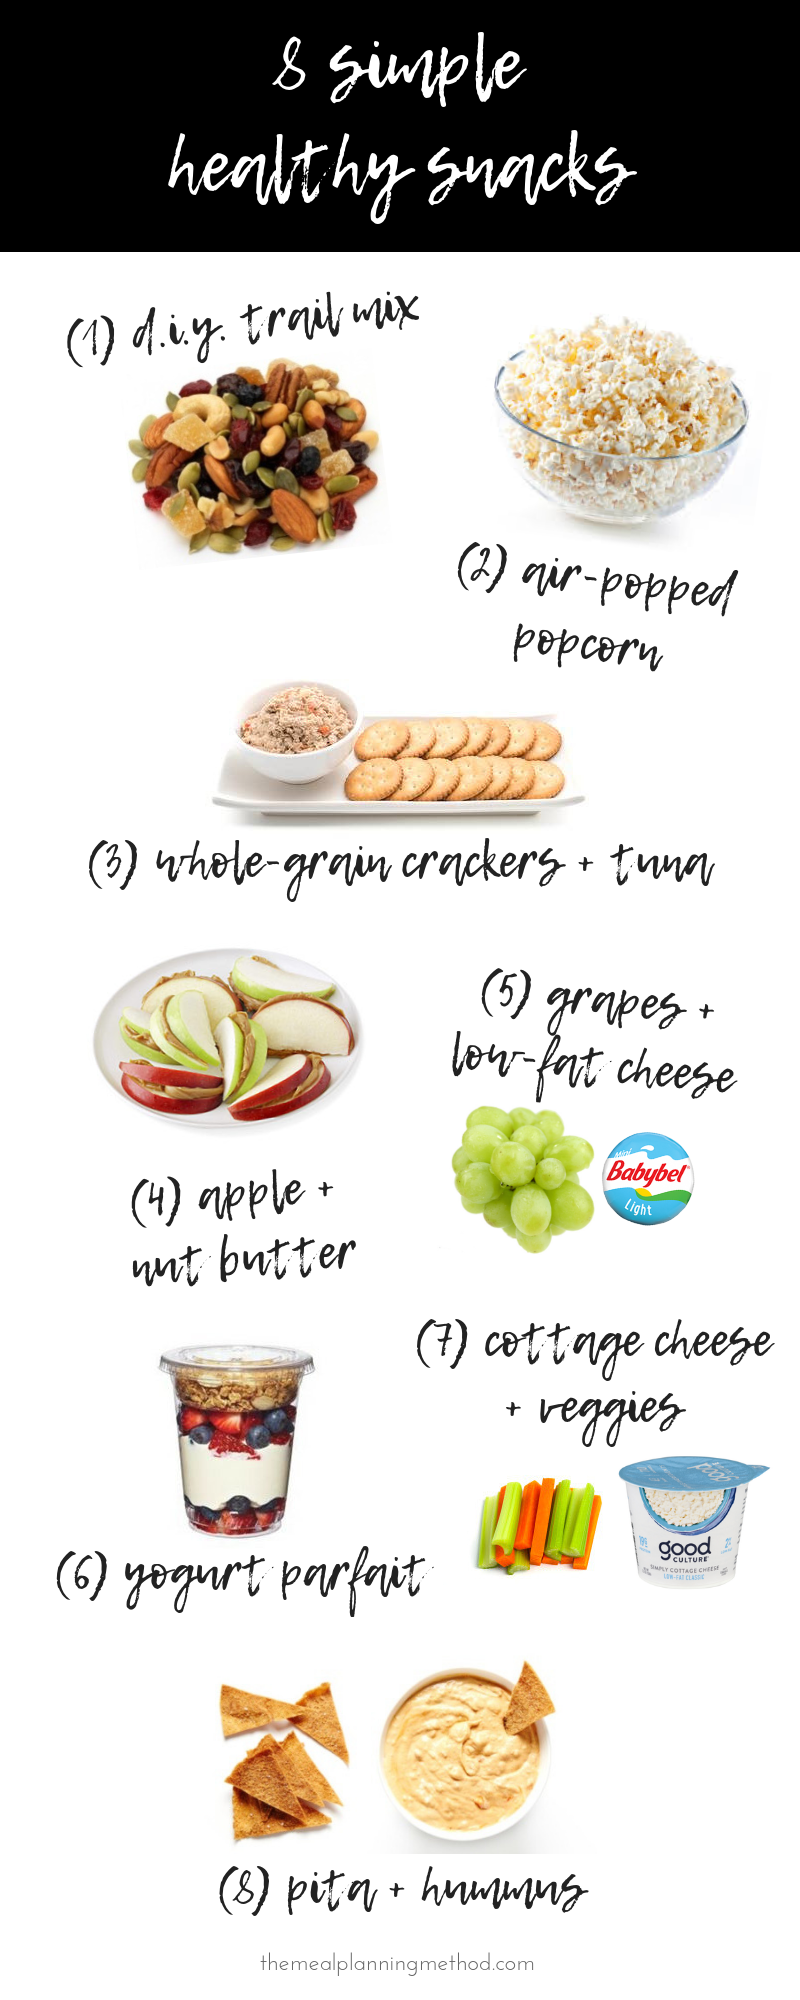 Cheap and healthy snack options